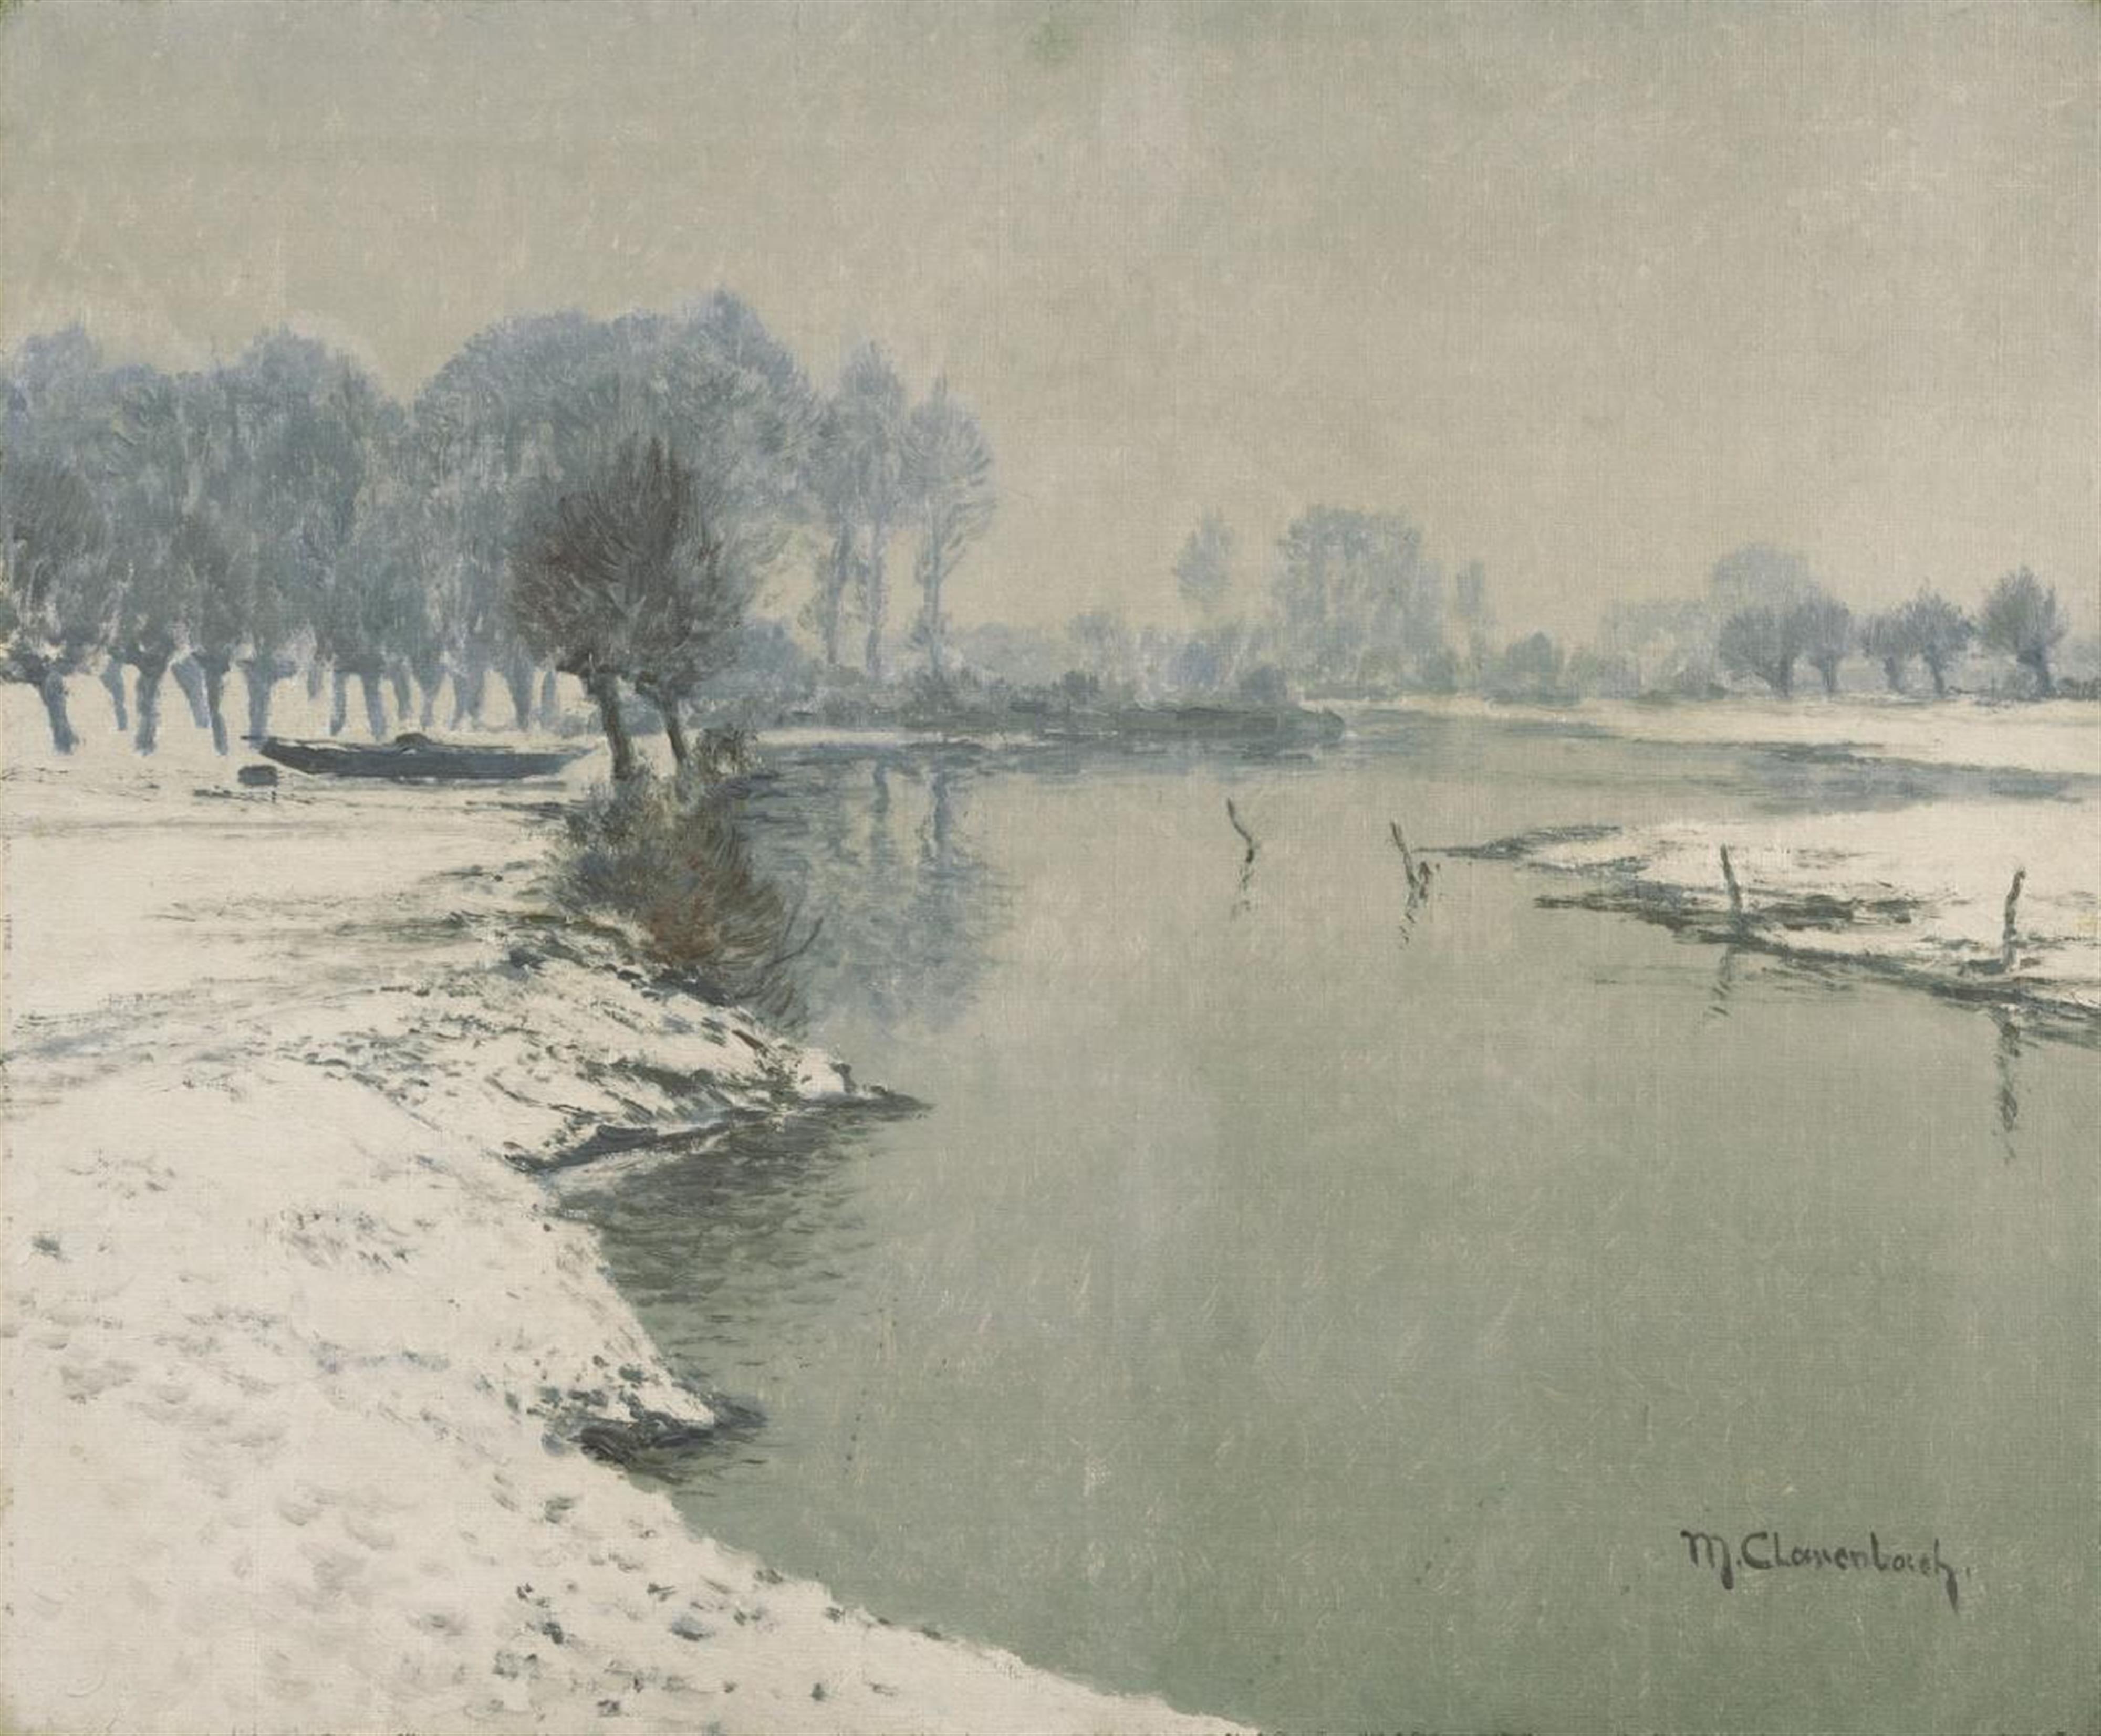 Max Clarenbach - Winter Landscape on the River Erft - image-1